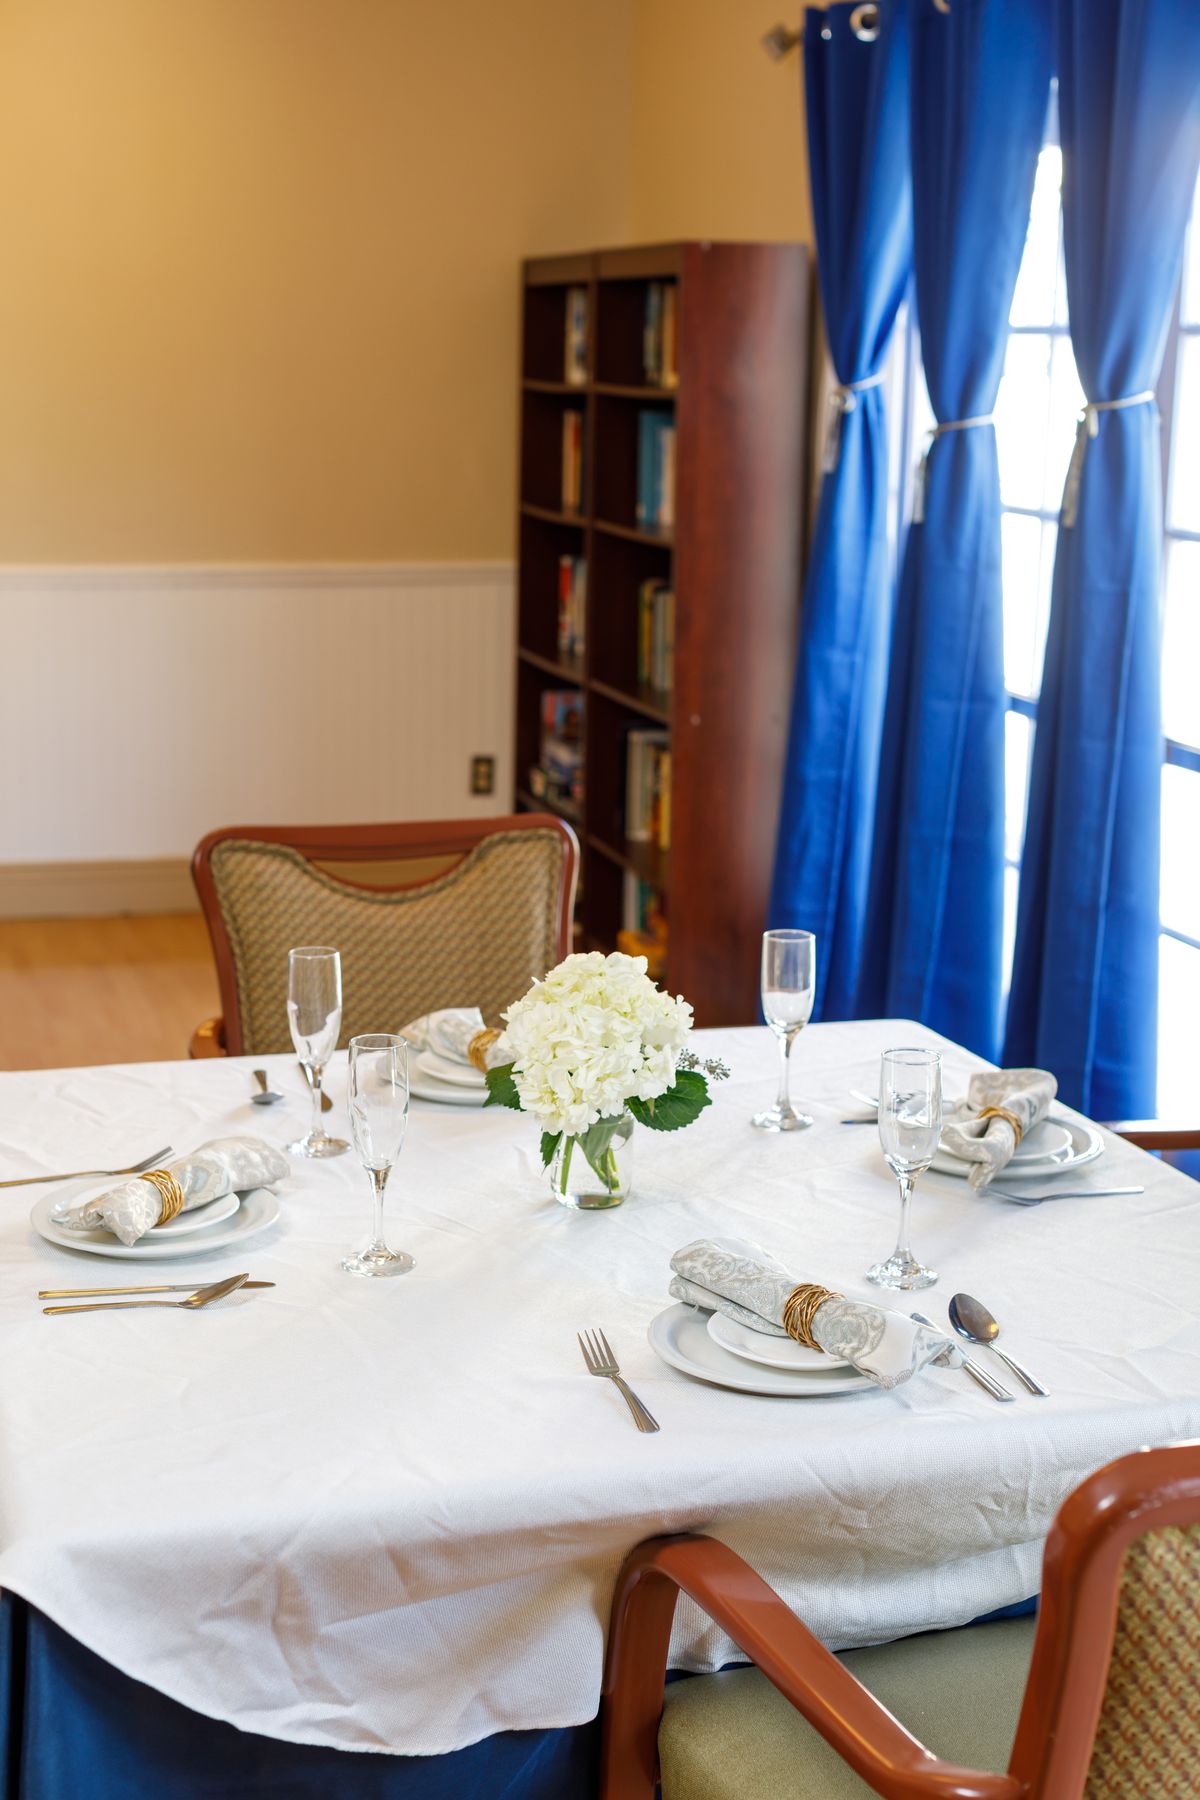 Elegant dining room setup at Ocean Pointe Healthcare Center with floral decor and food.